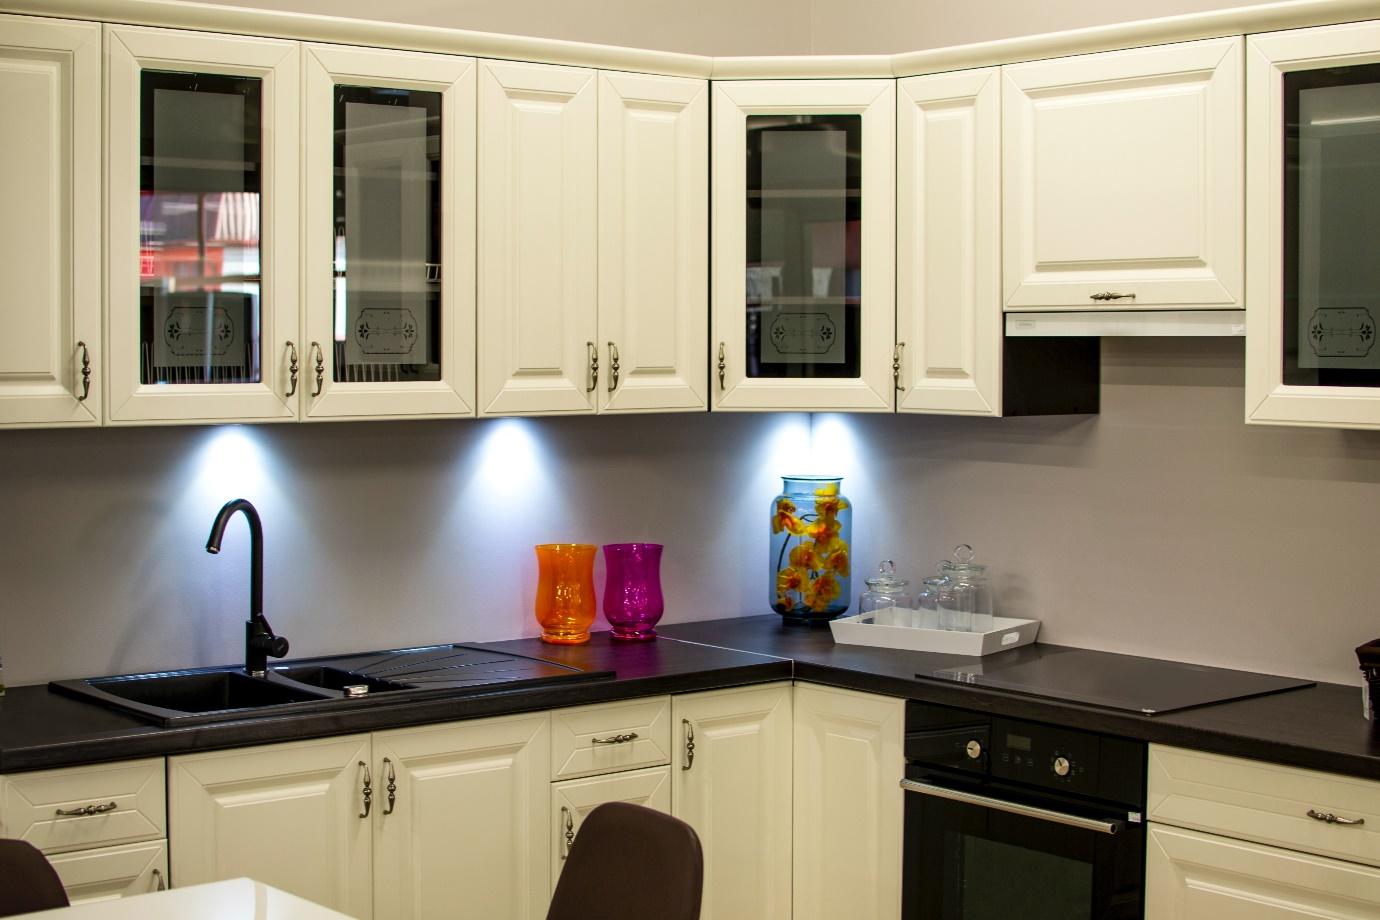 Kitchens with lights